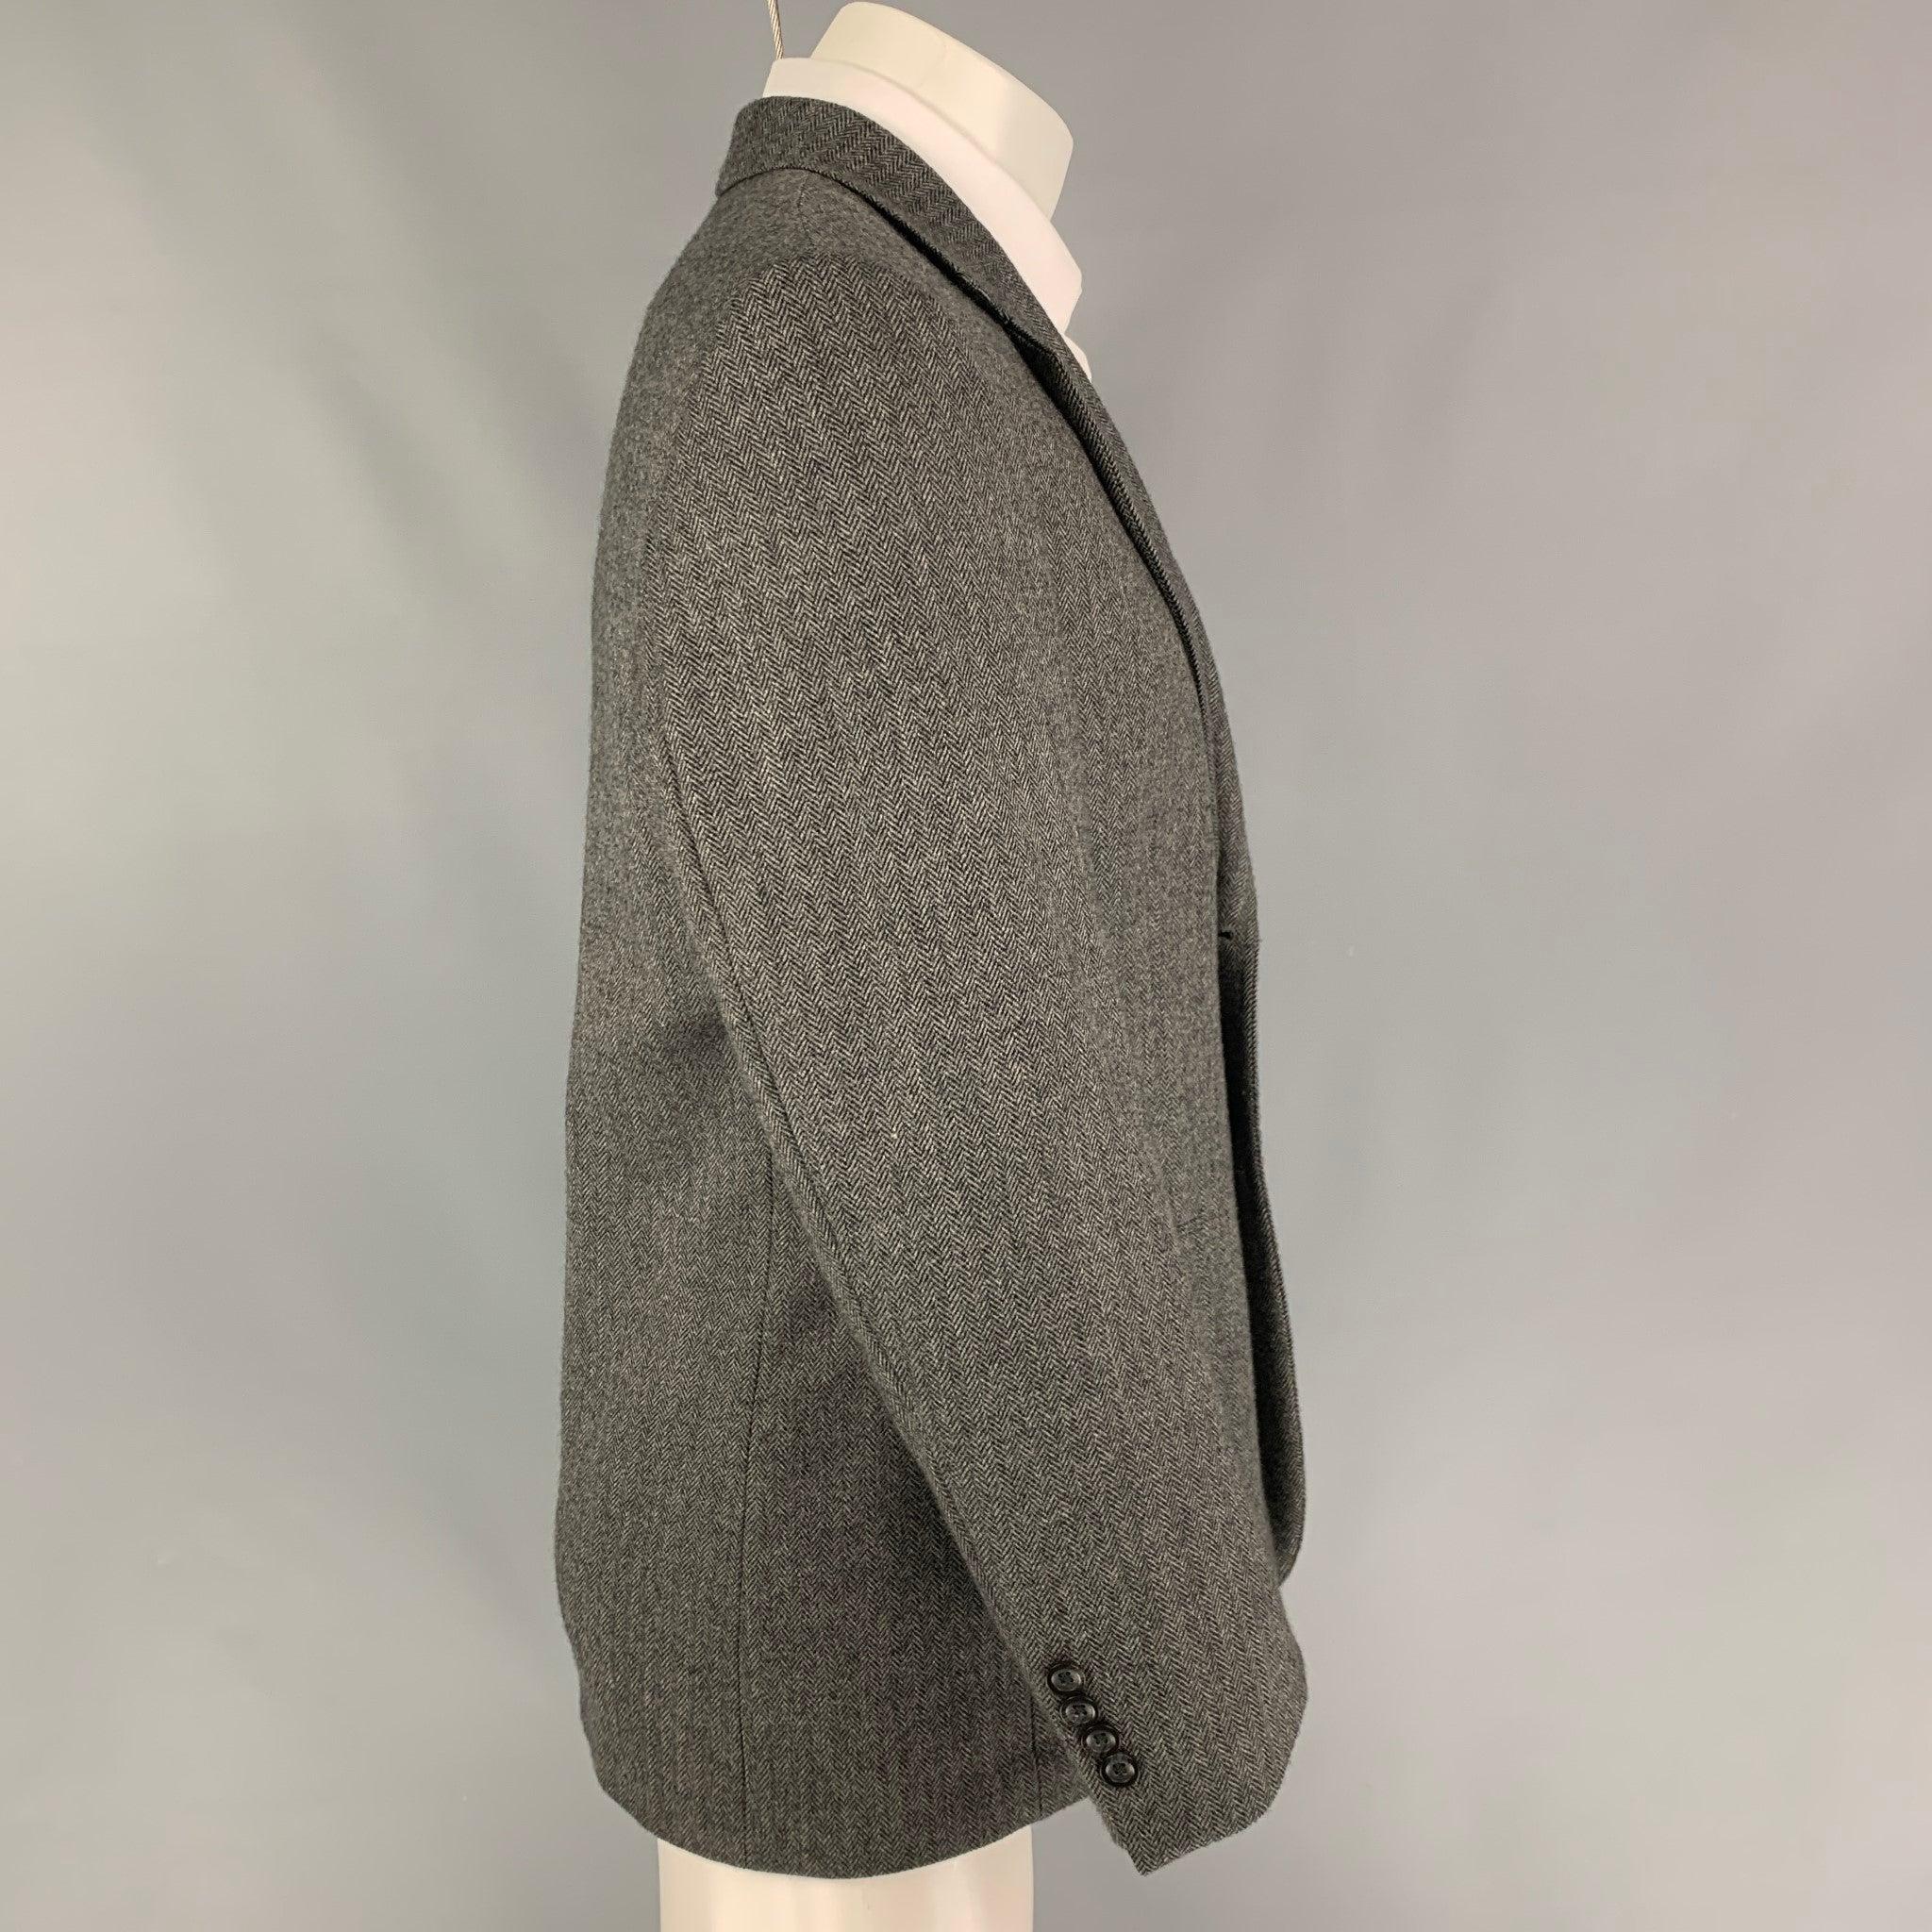 OSCAR DE LA RENTA sport coat comes in a grey & black herringbone wool featuring a notch lapel, flap pockets, and a double button closure.
Very Good
Pre-Owned Condition. 

Marked:   38 S 

Measurements: 
 
Shoulder: 18.5 inches  Chest: 38 inches 